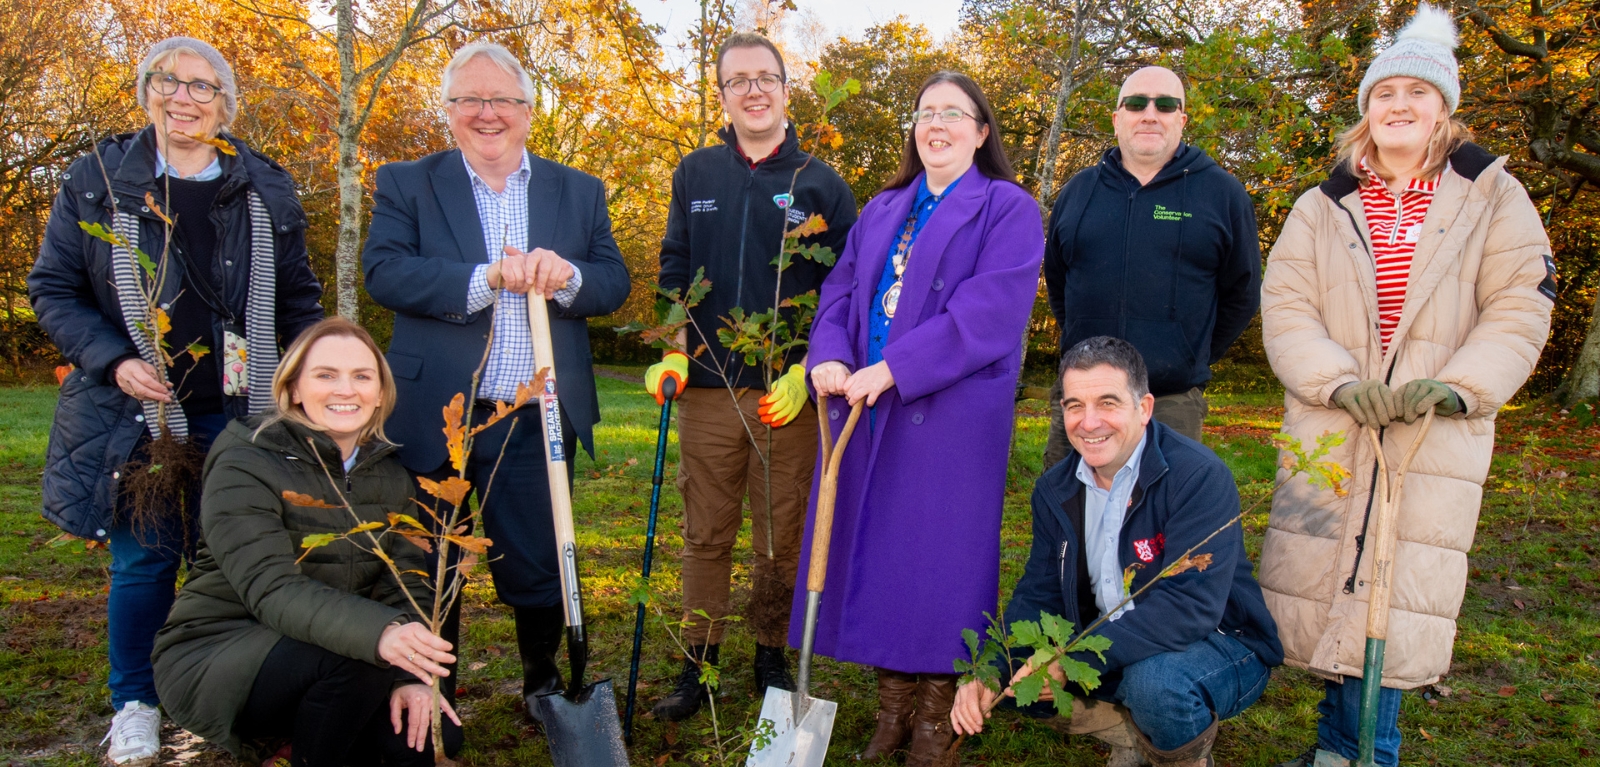 Belfast Deputy Lord Mayor with Queen's staff, students and local residents at the tree planting at Malone Playing Fields, November 2022